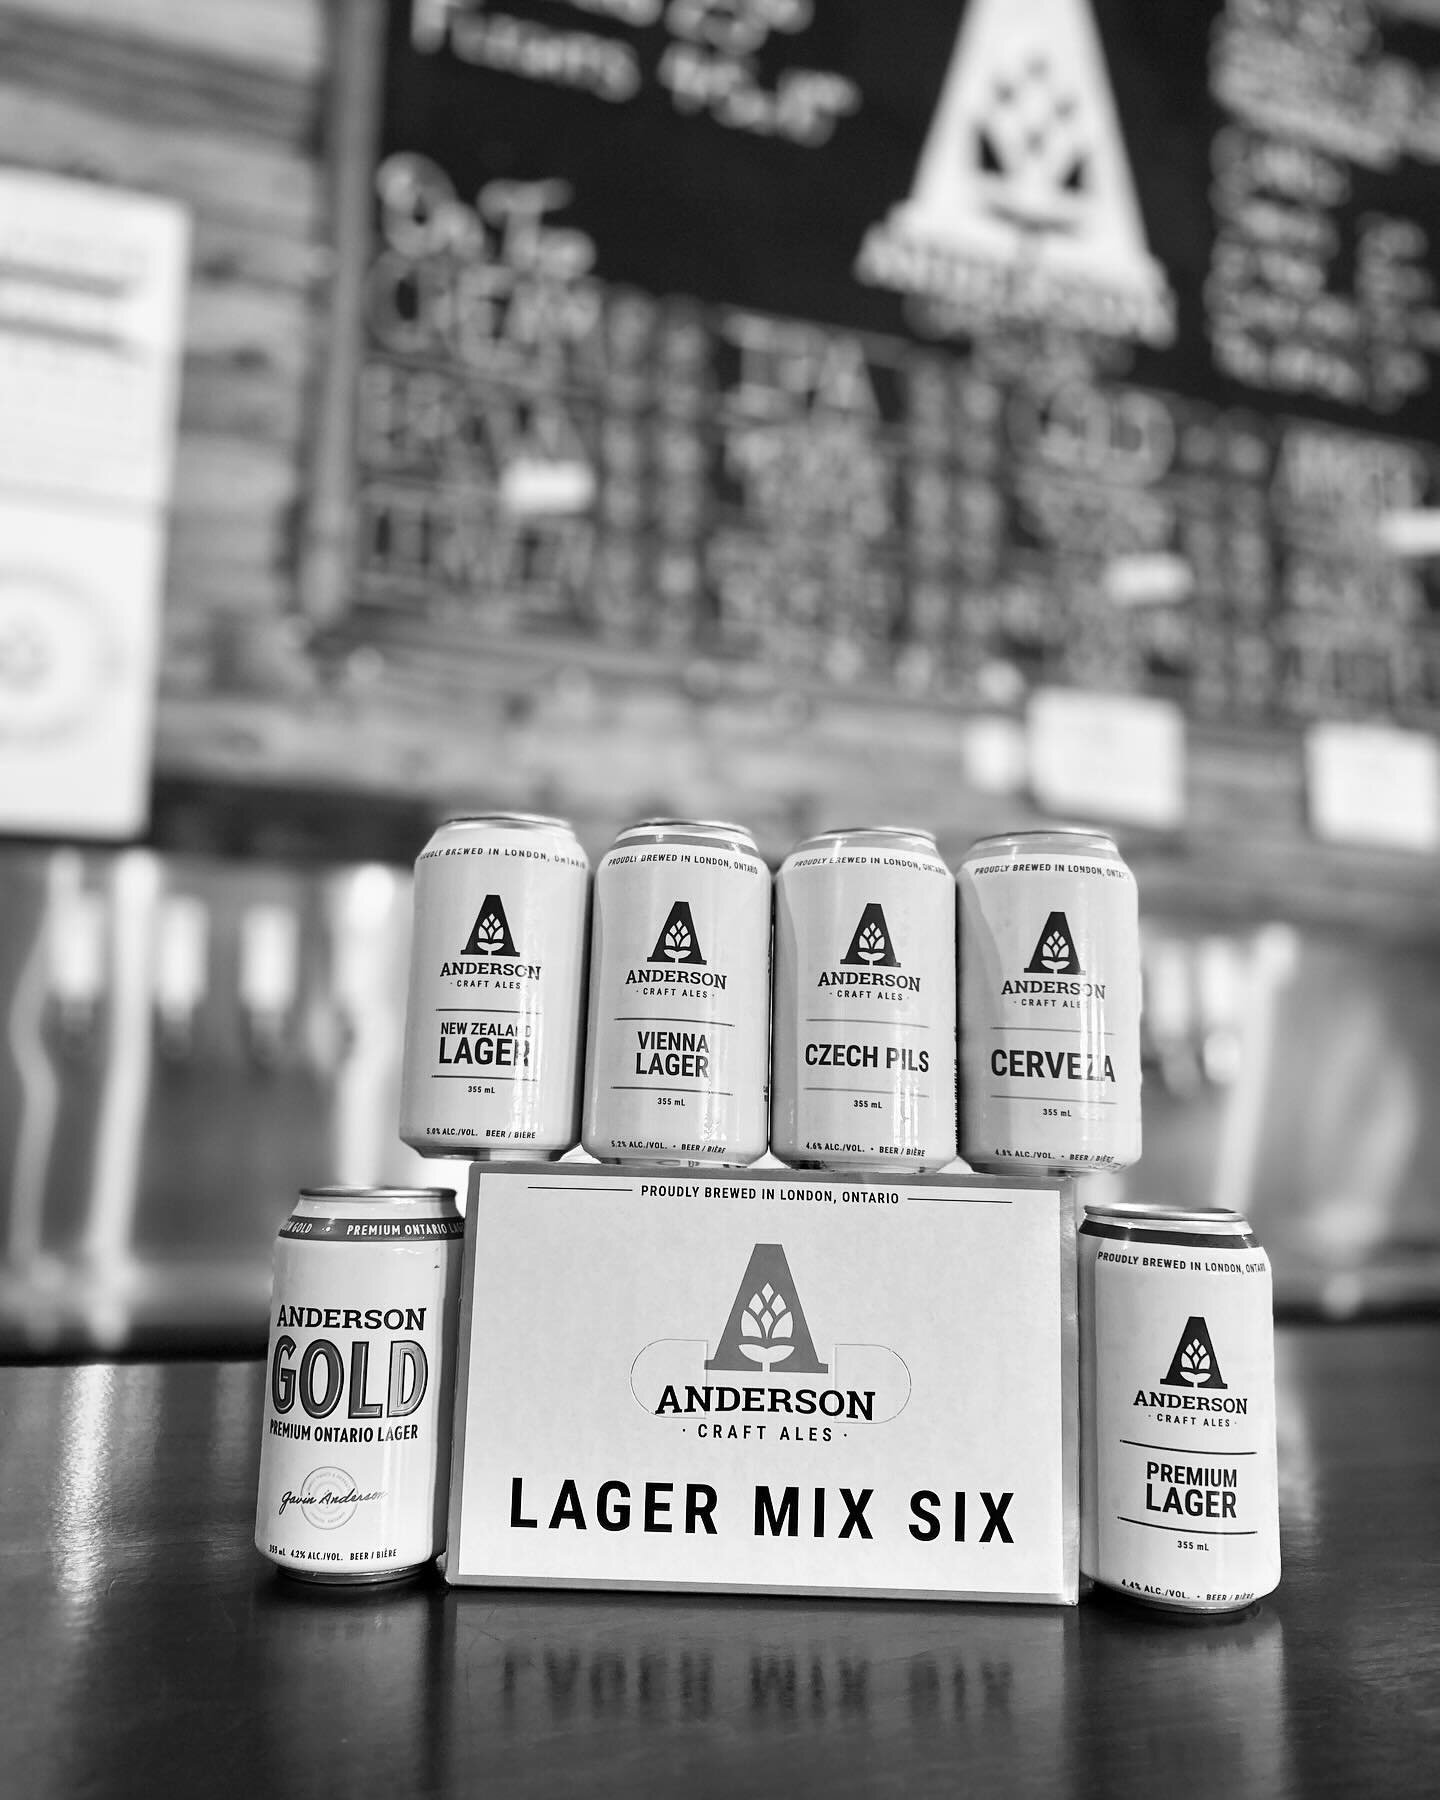 Last Week we had our mix 6 launch party, our mix 6 lager pack is available in the taproom and LCBOs. 

Including:
 Gold Lager
New Zealand Lager 
Vienna Lager
Czech Pilsner
Premium Lager 
Cerveza